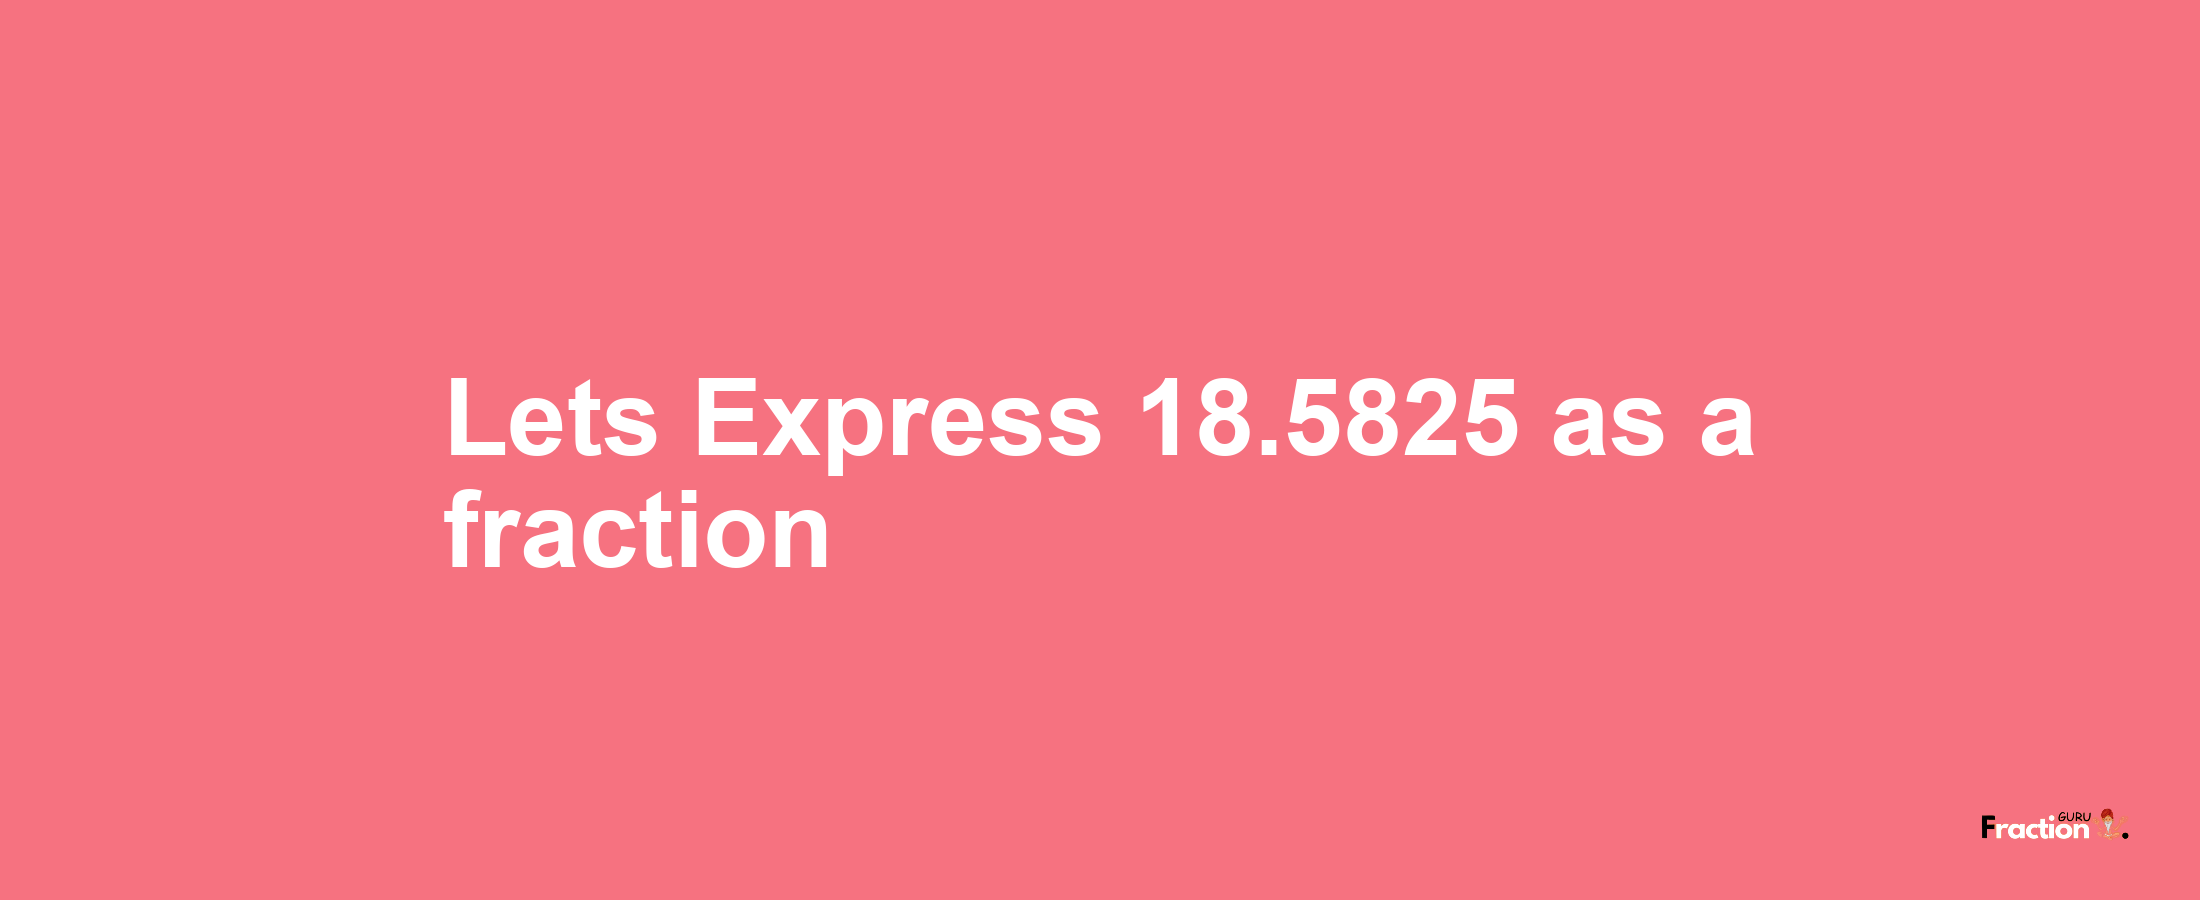 Lets Express 18.5825 as afraction